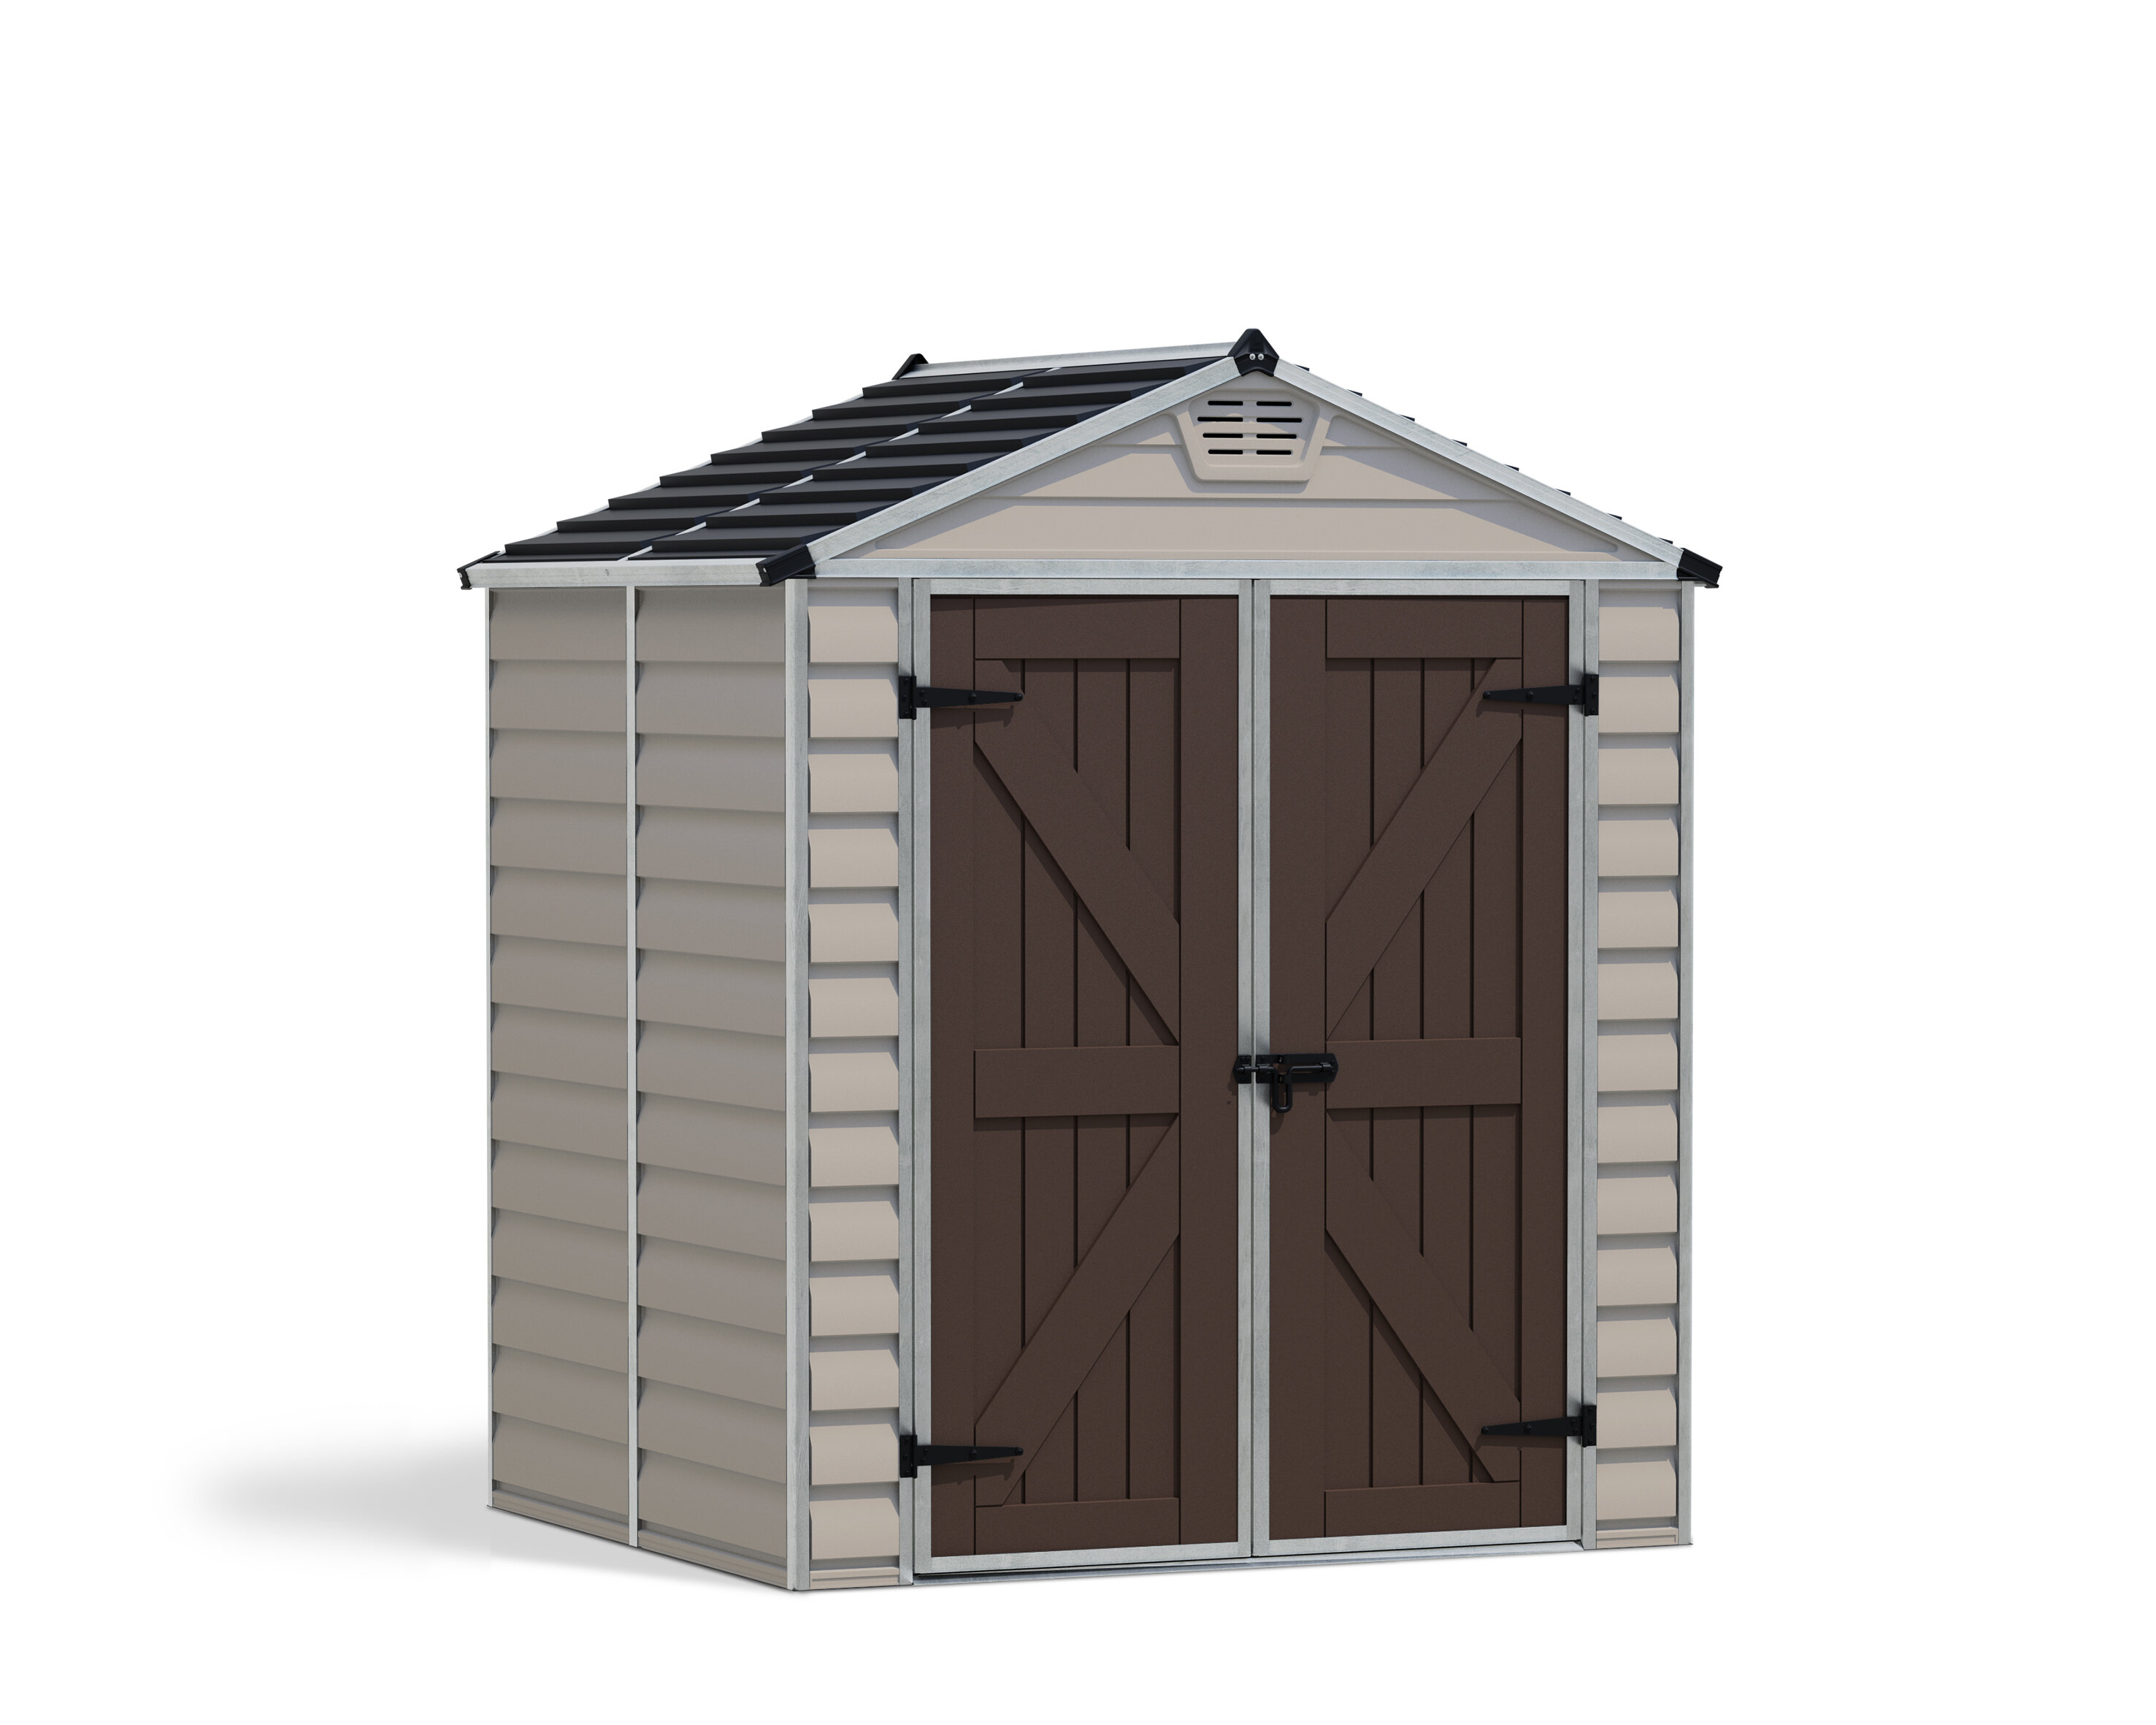 Palram Skylight 85.4” H x 73” W x 60.4” D Polycarbonate and Aluminum  Traditional Storage Shed & Reviews | Wayfair